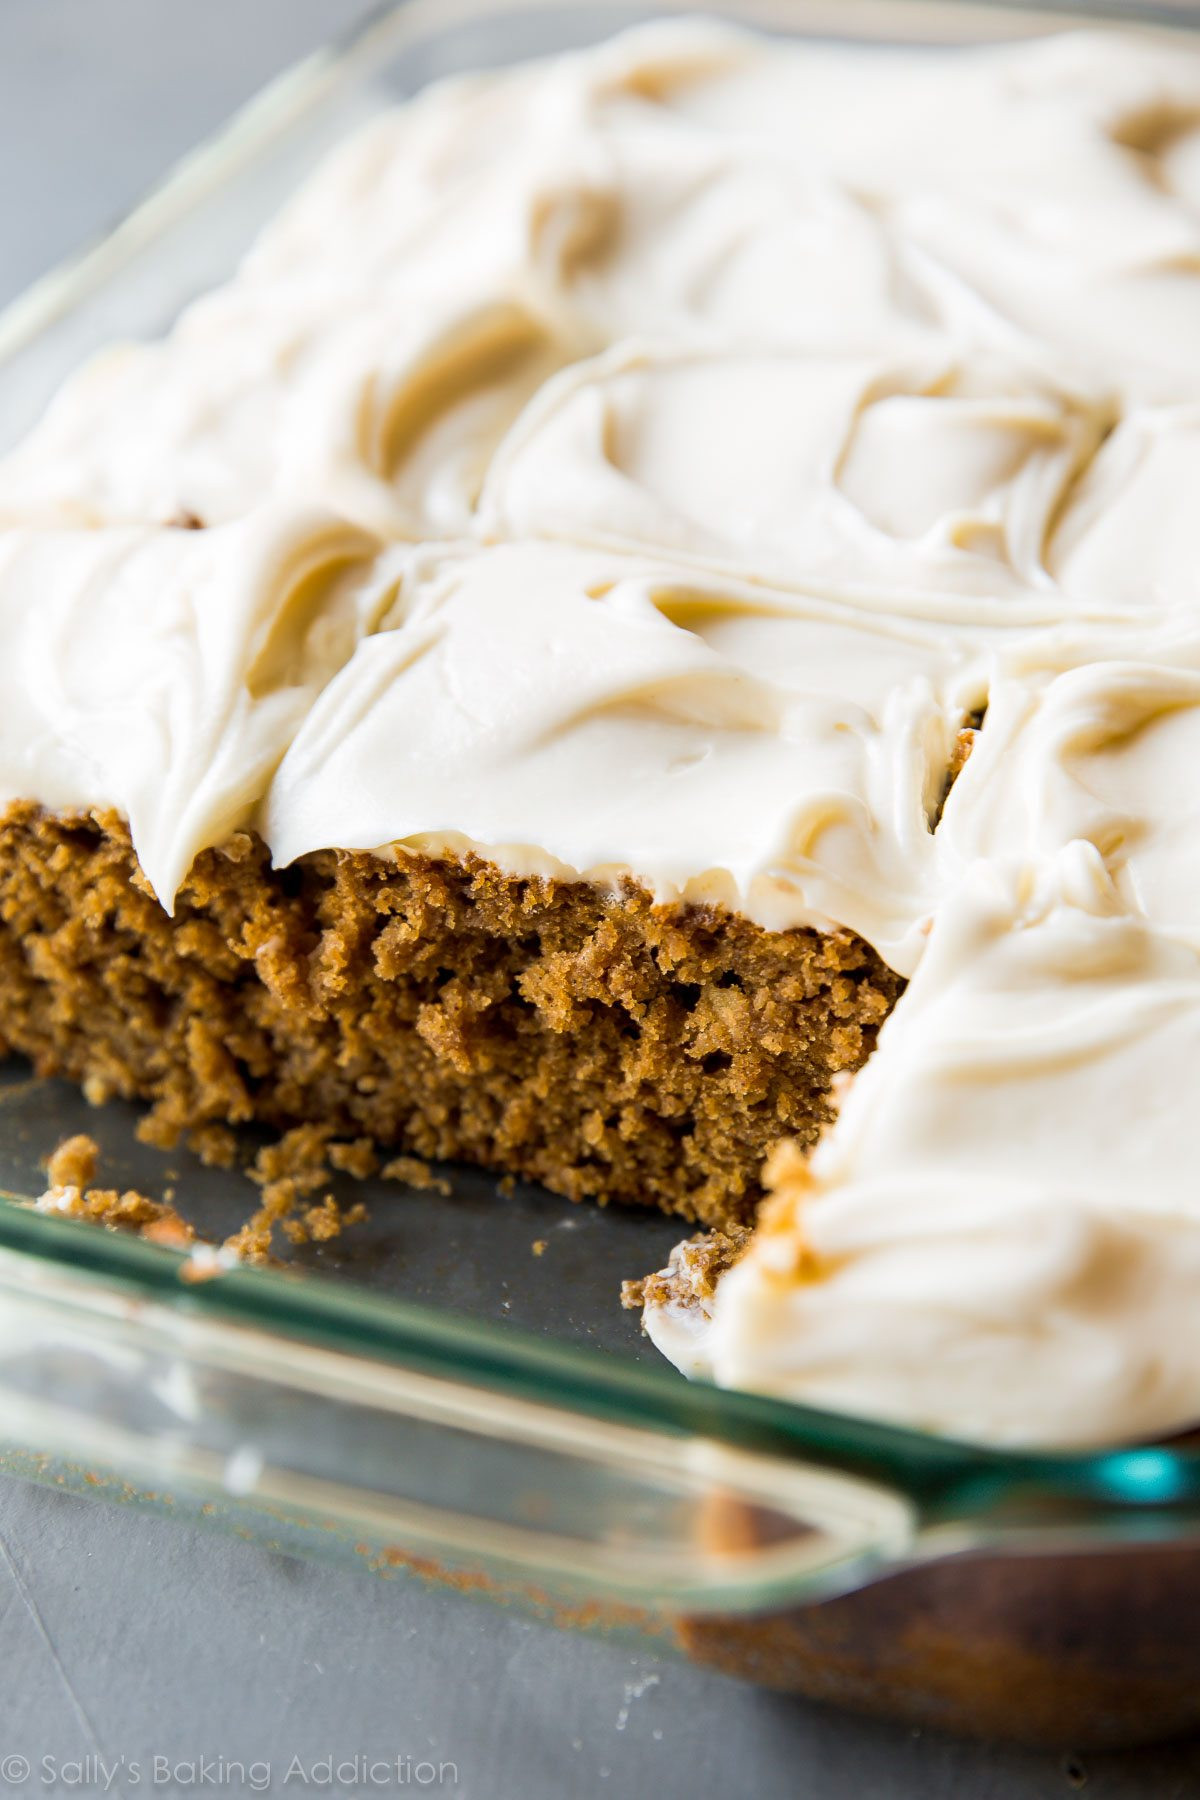 Spice Cake Recipe With Cream Cheese Frosting
 Super Moist Spice Cake